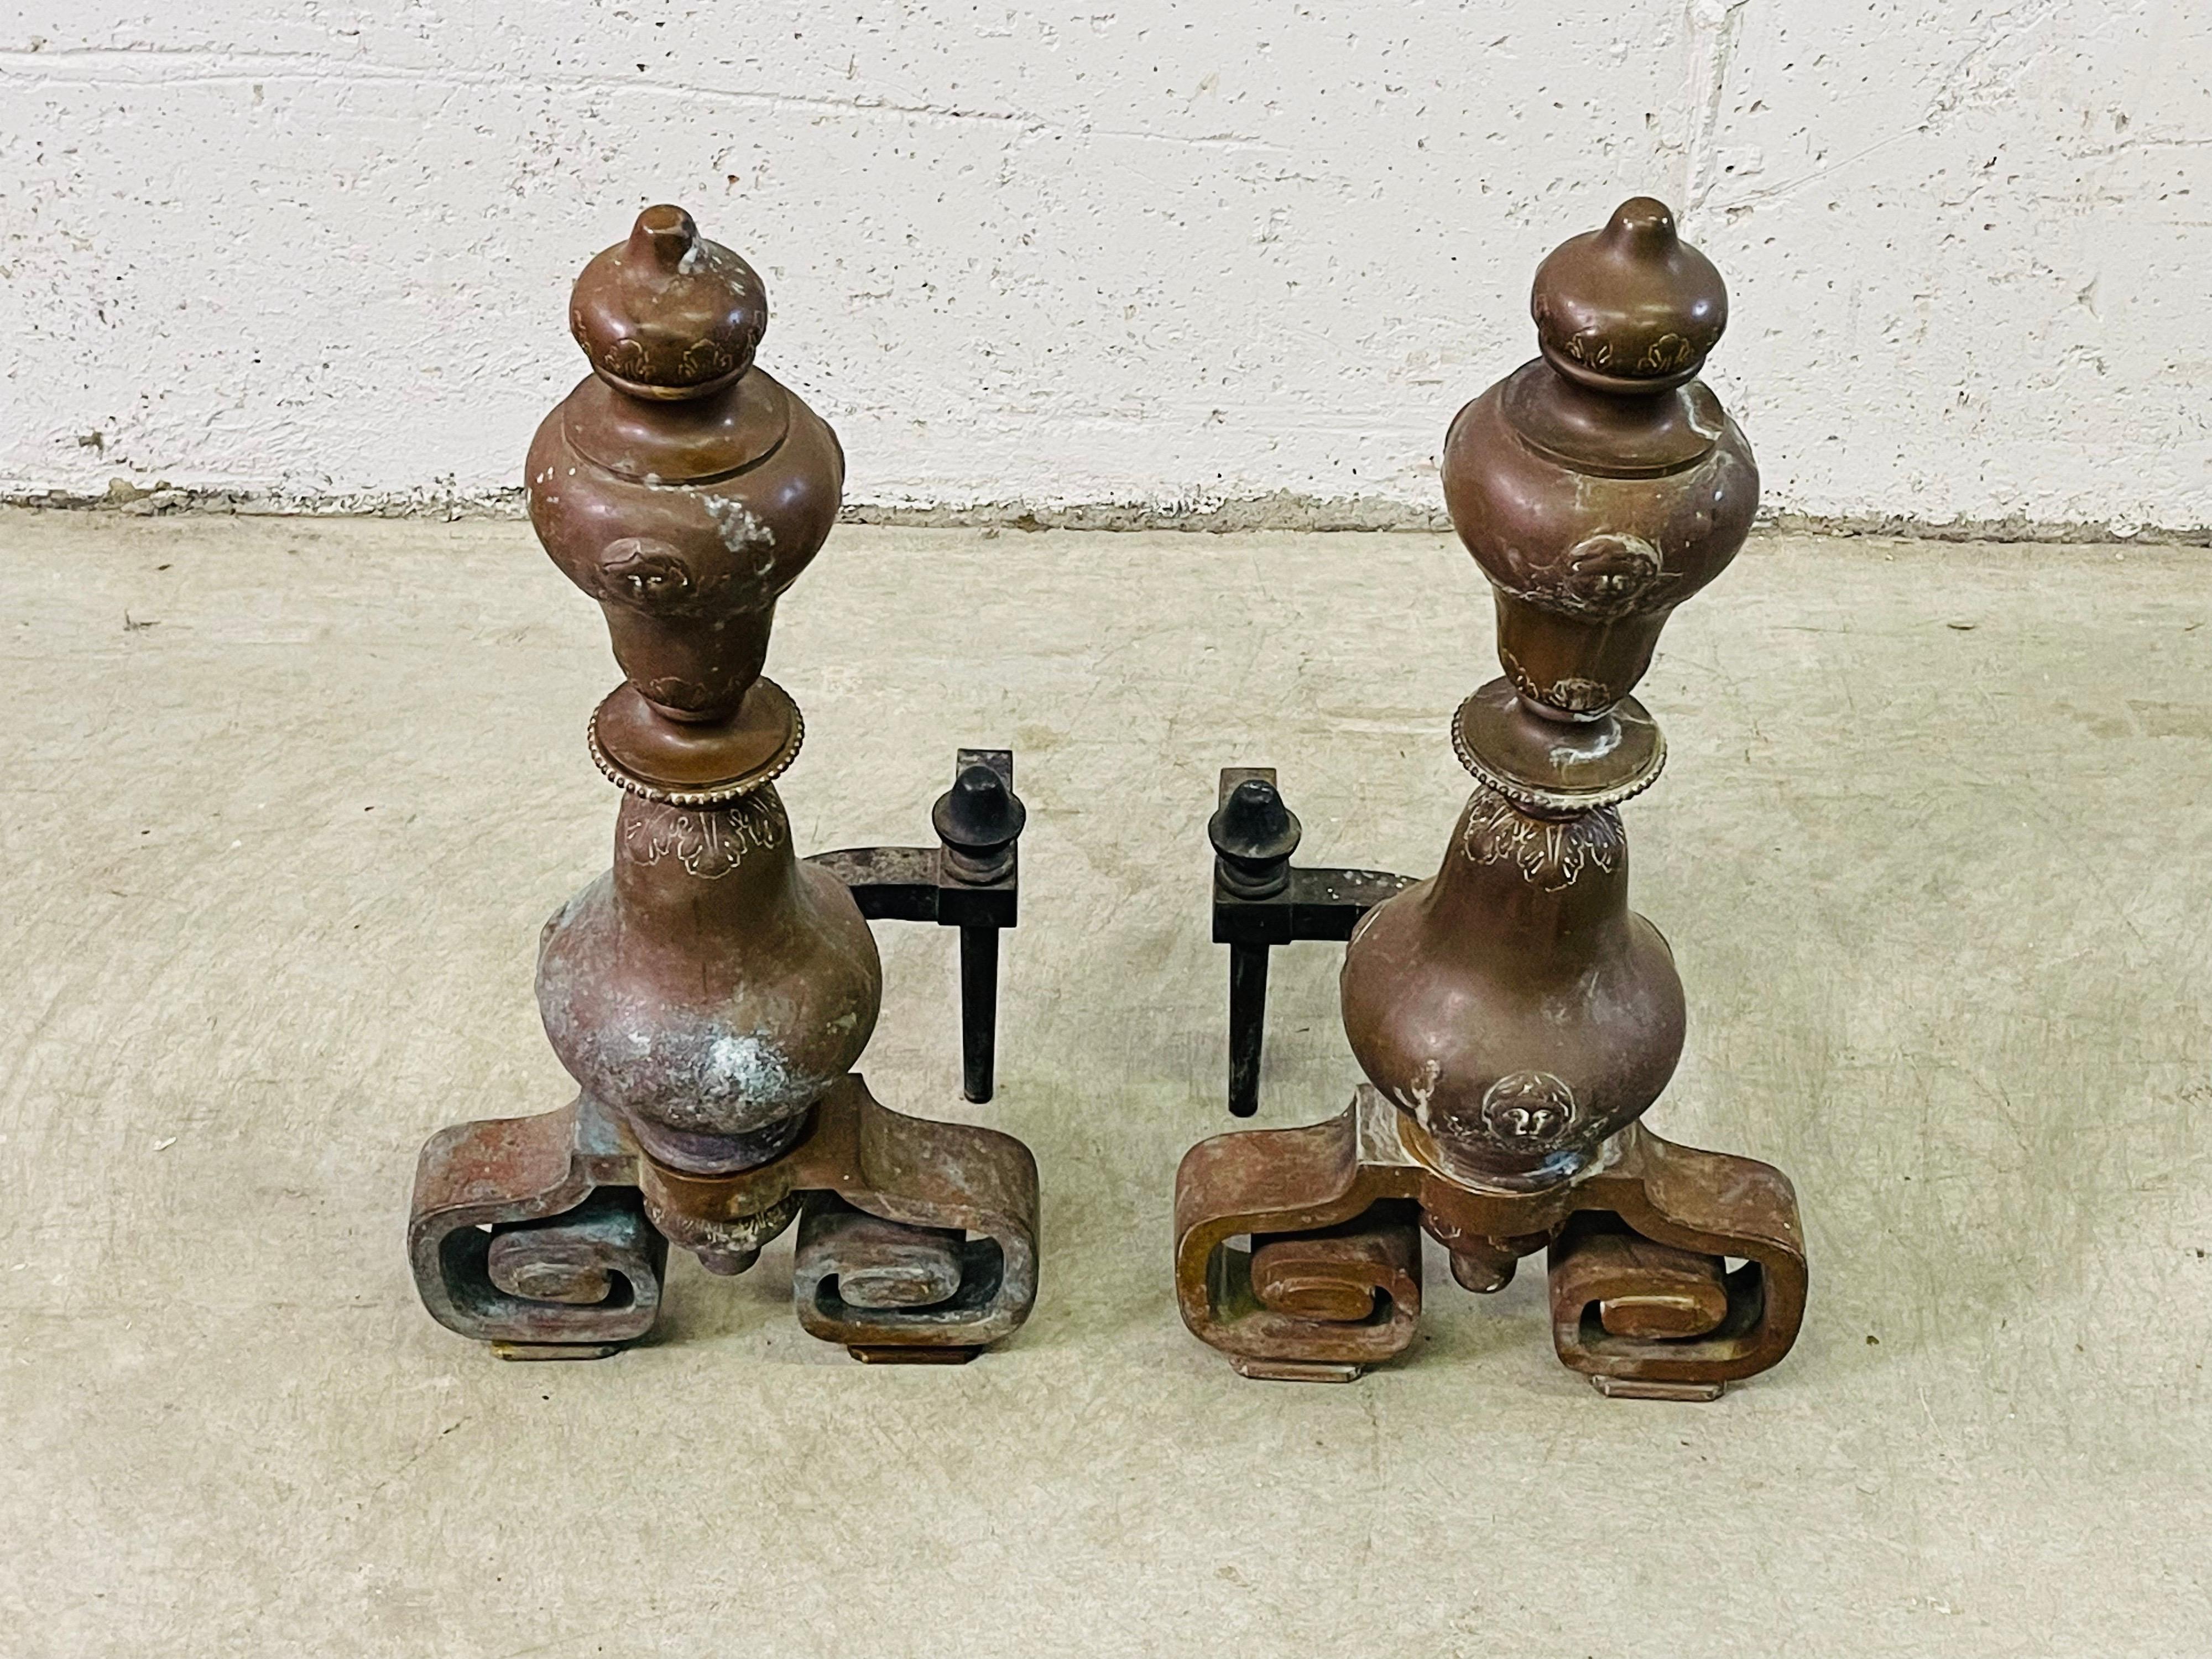 Vintage pair of copper andirons with an Asian styled iron base. The andirons have an incised design that includes what looks like childrens faces. The andirons need to be restored because of the tarnish to the copper. But they are solid and sturdy.